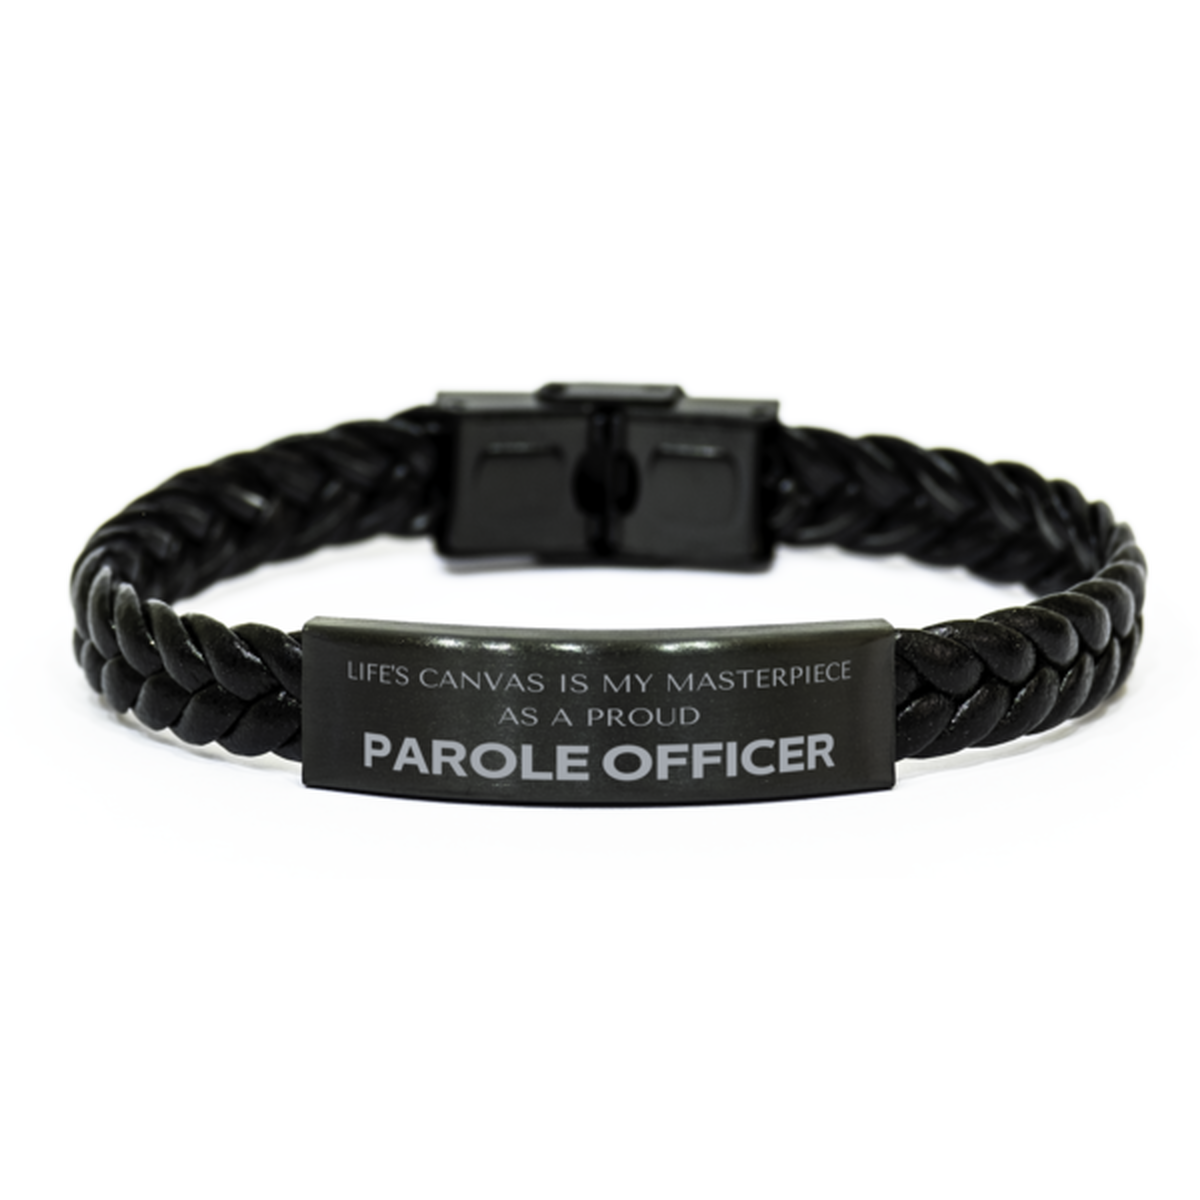 Proud Parole Officer Gifts, Life's canvas is my masterpiece, Epic Birthday Christmas Unique Braided Leather Bracelet For Parole Officer, Coworkers, Men, Women, Friends